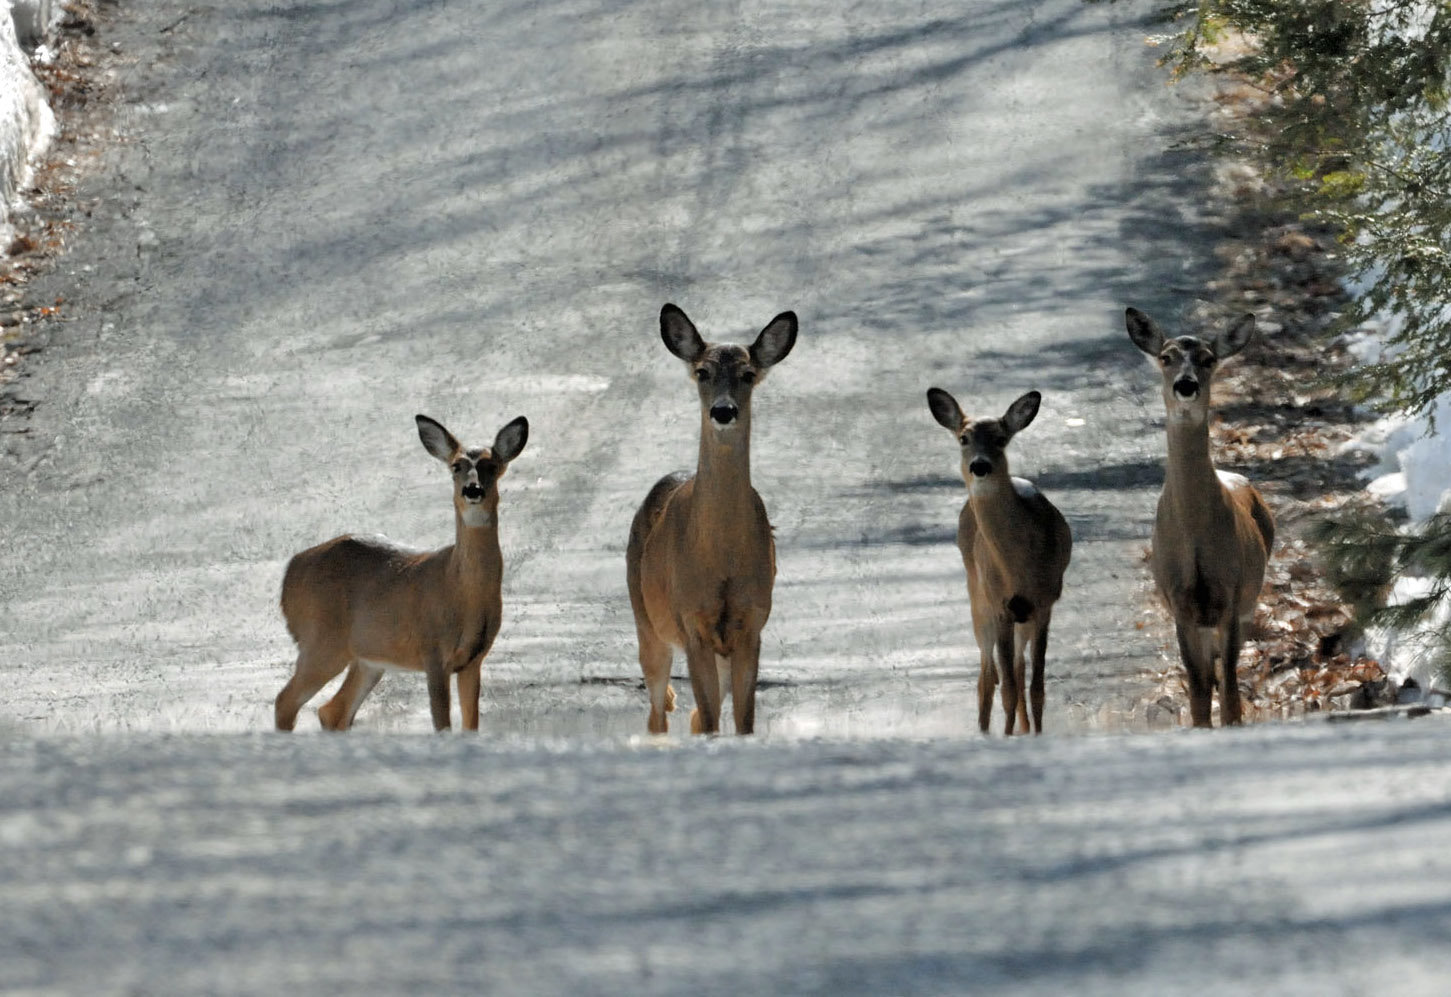 Along roads, deer can be found traveling down the road or foraging for food, especially if there is a lot of snow present. That was the case on this Pike County secondary road. If deer are crossing the road during the rut, they may be involved in the rut, or being pushed by hunters walking in the woods. If either is the case, the deer will be crossing the road on the run.